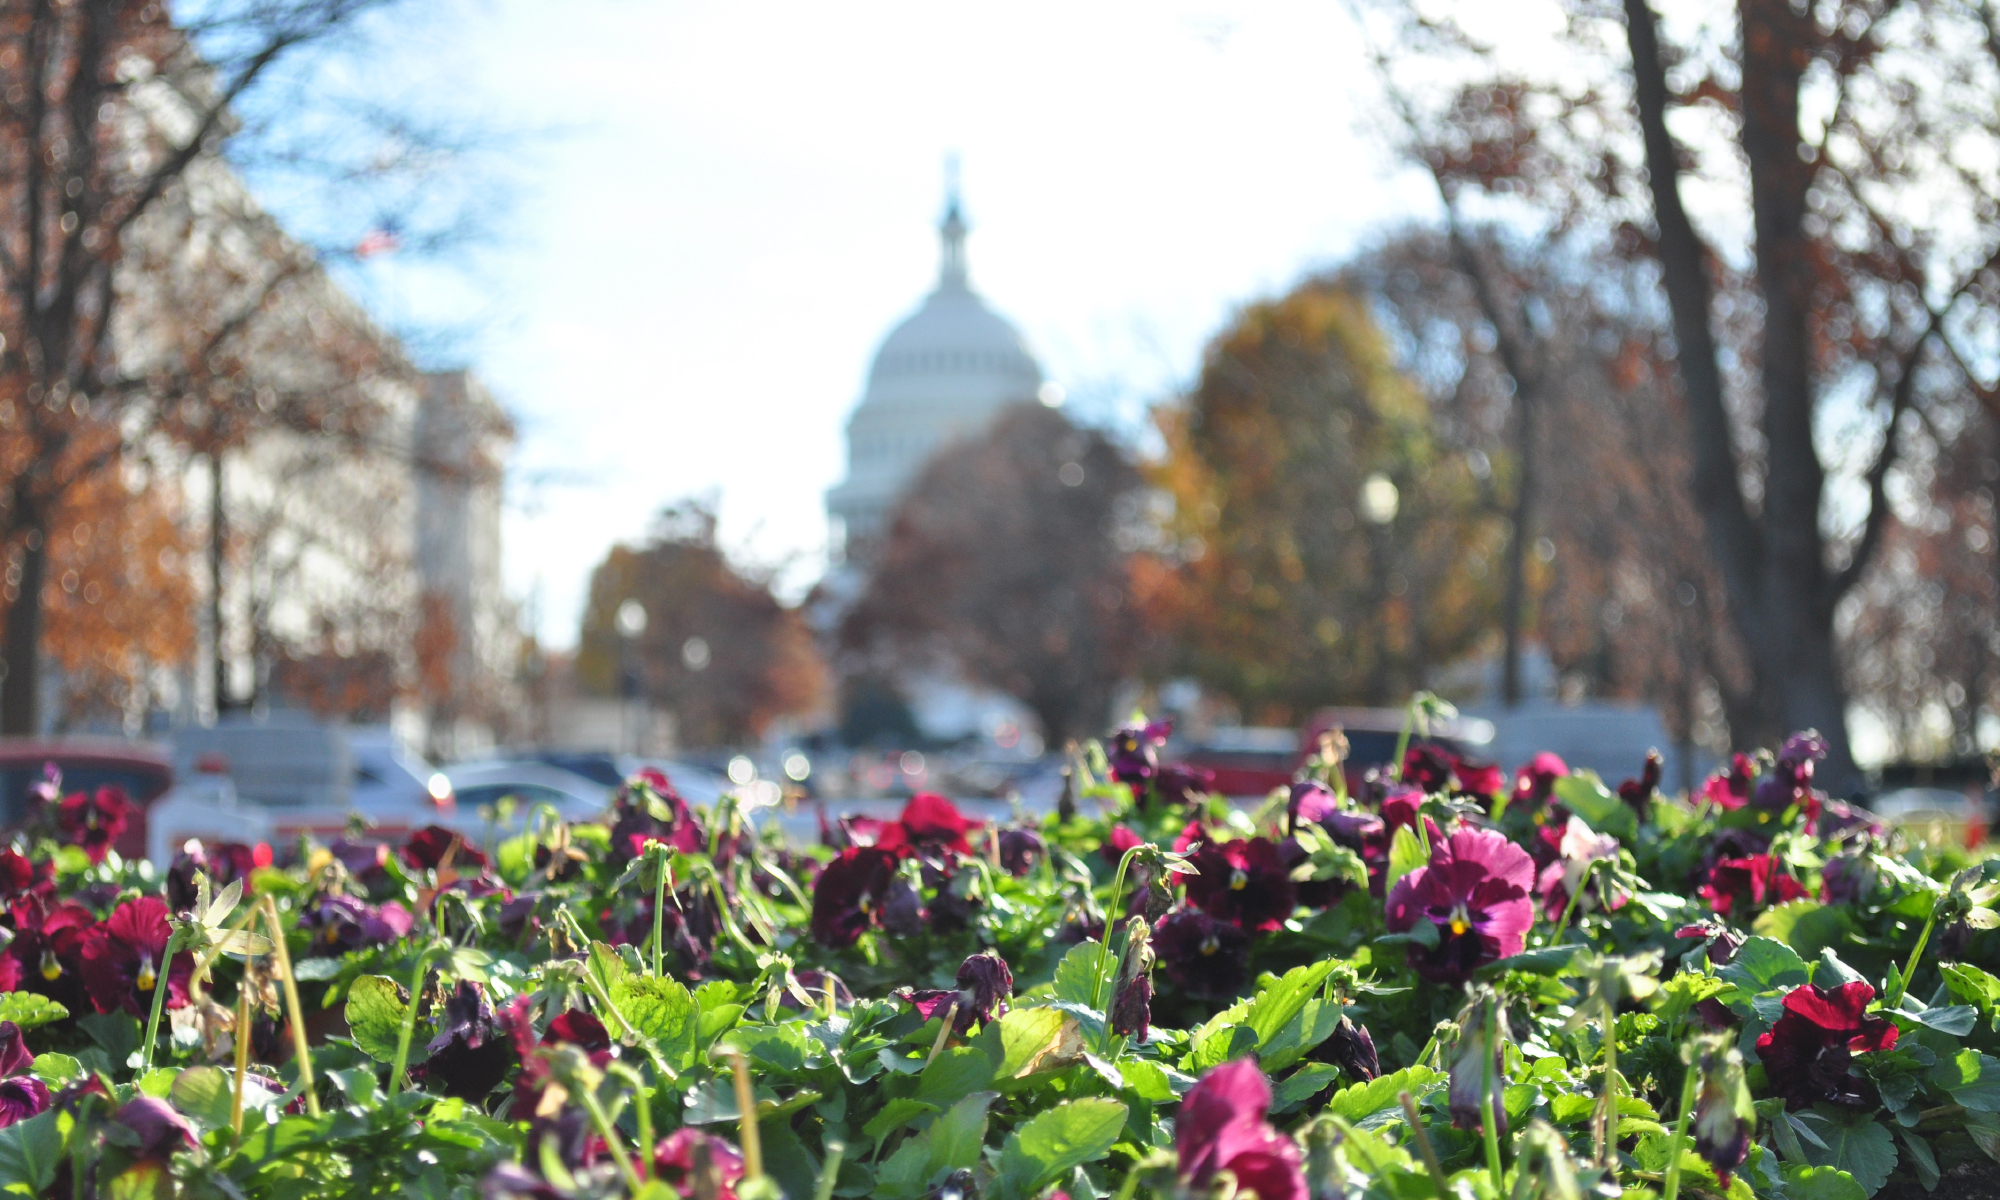 U.S. Capitol out of focus behind flowers